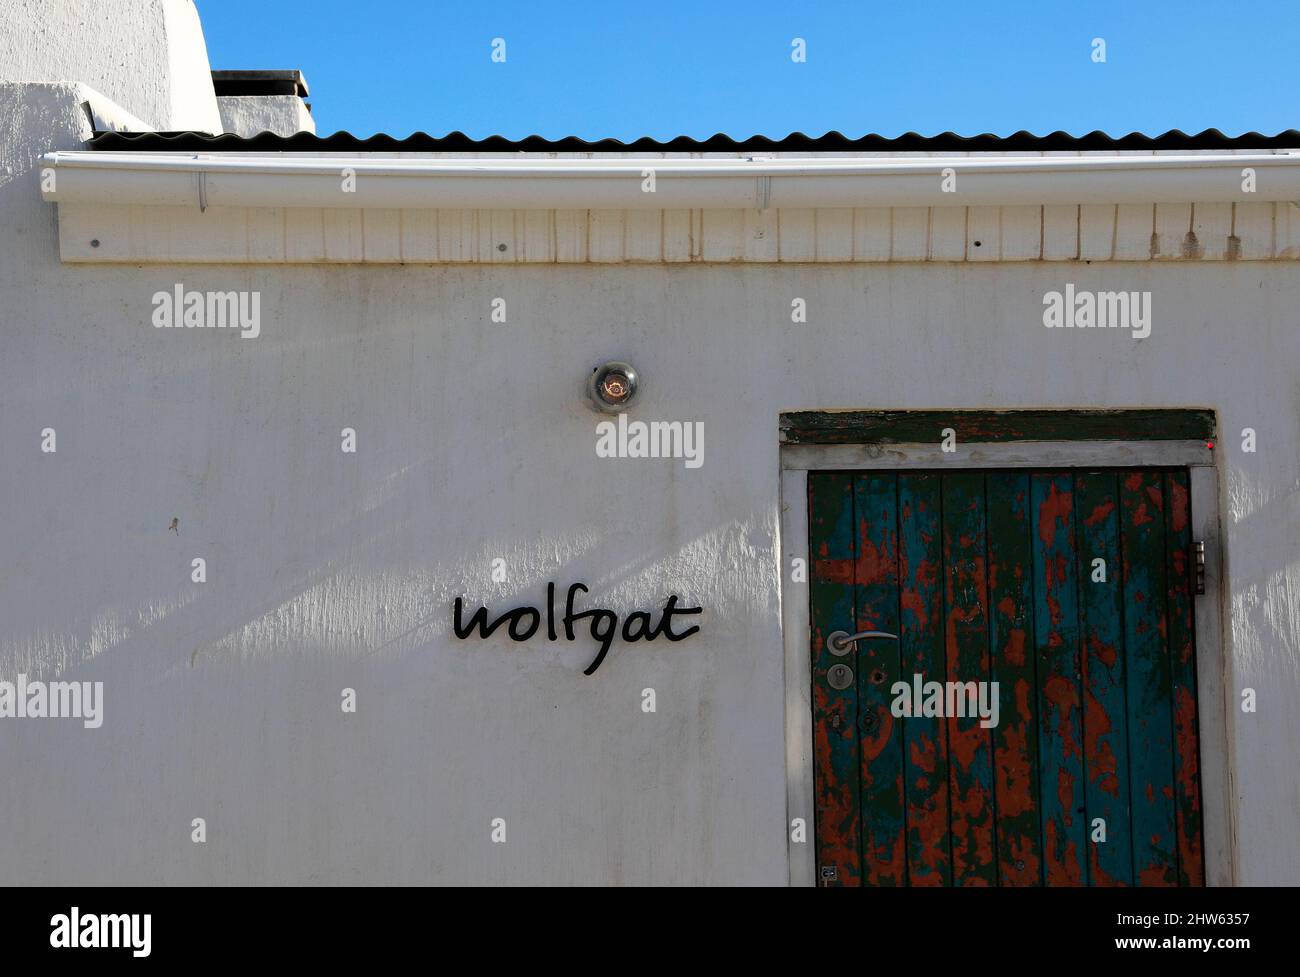 Wolfgat Restaurant, Paternoster, Cape West Coast, Western Province, South Africa. Stock Photo